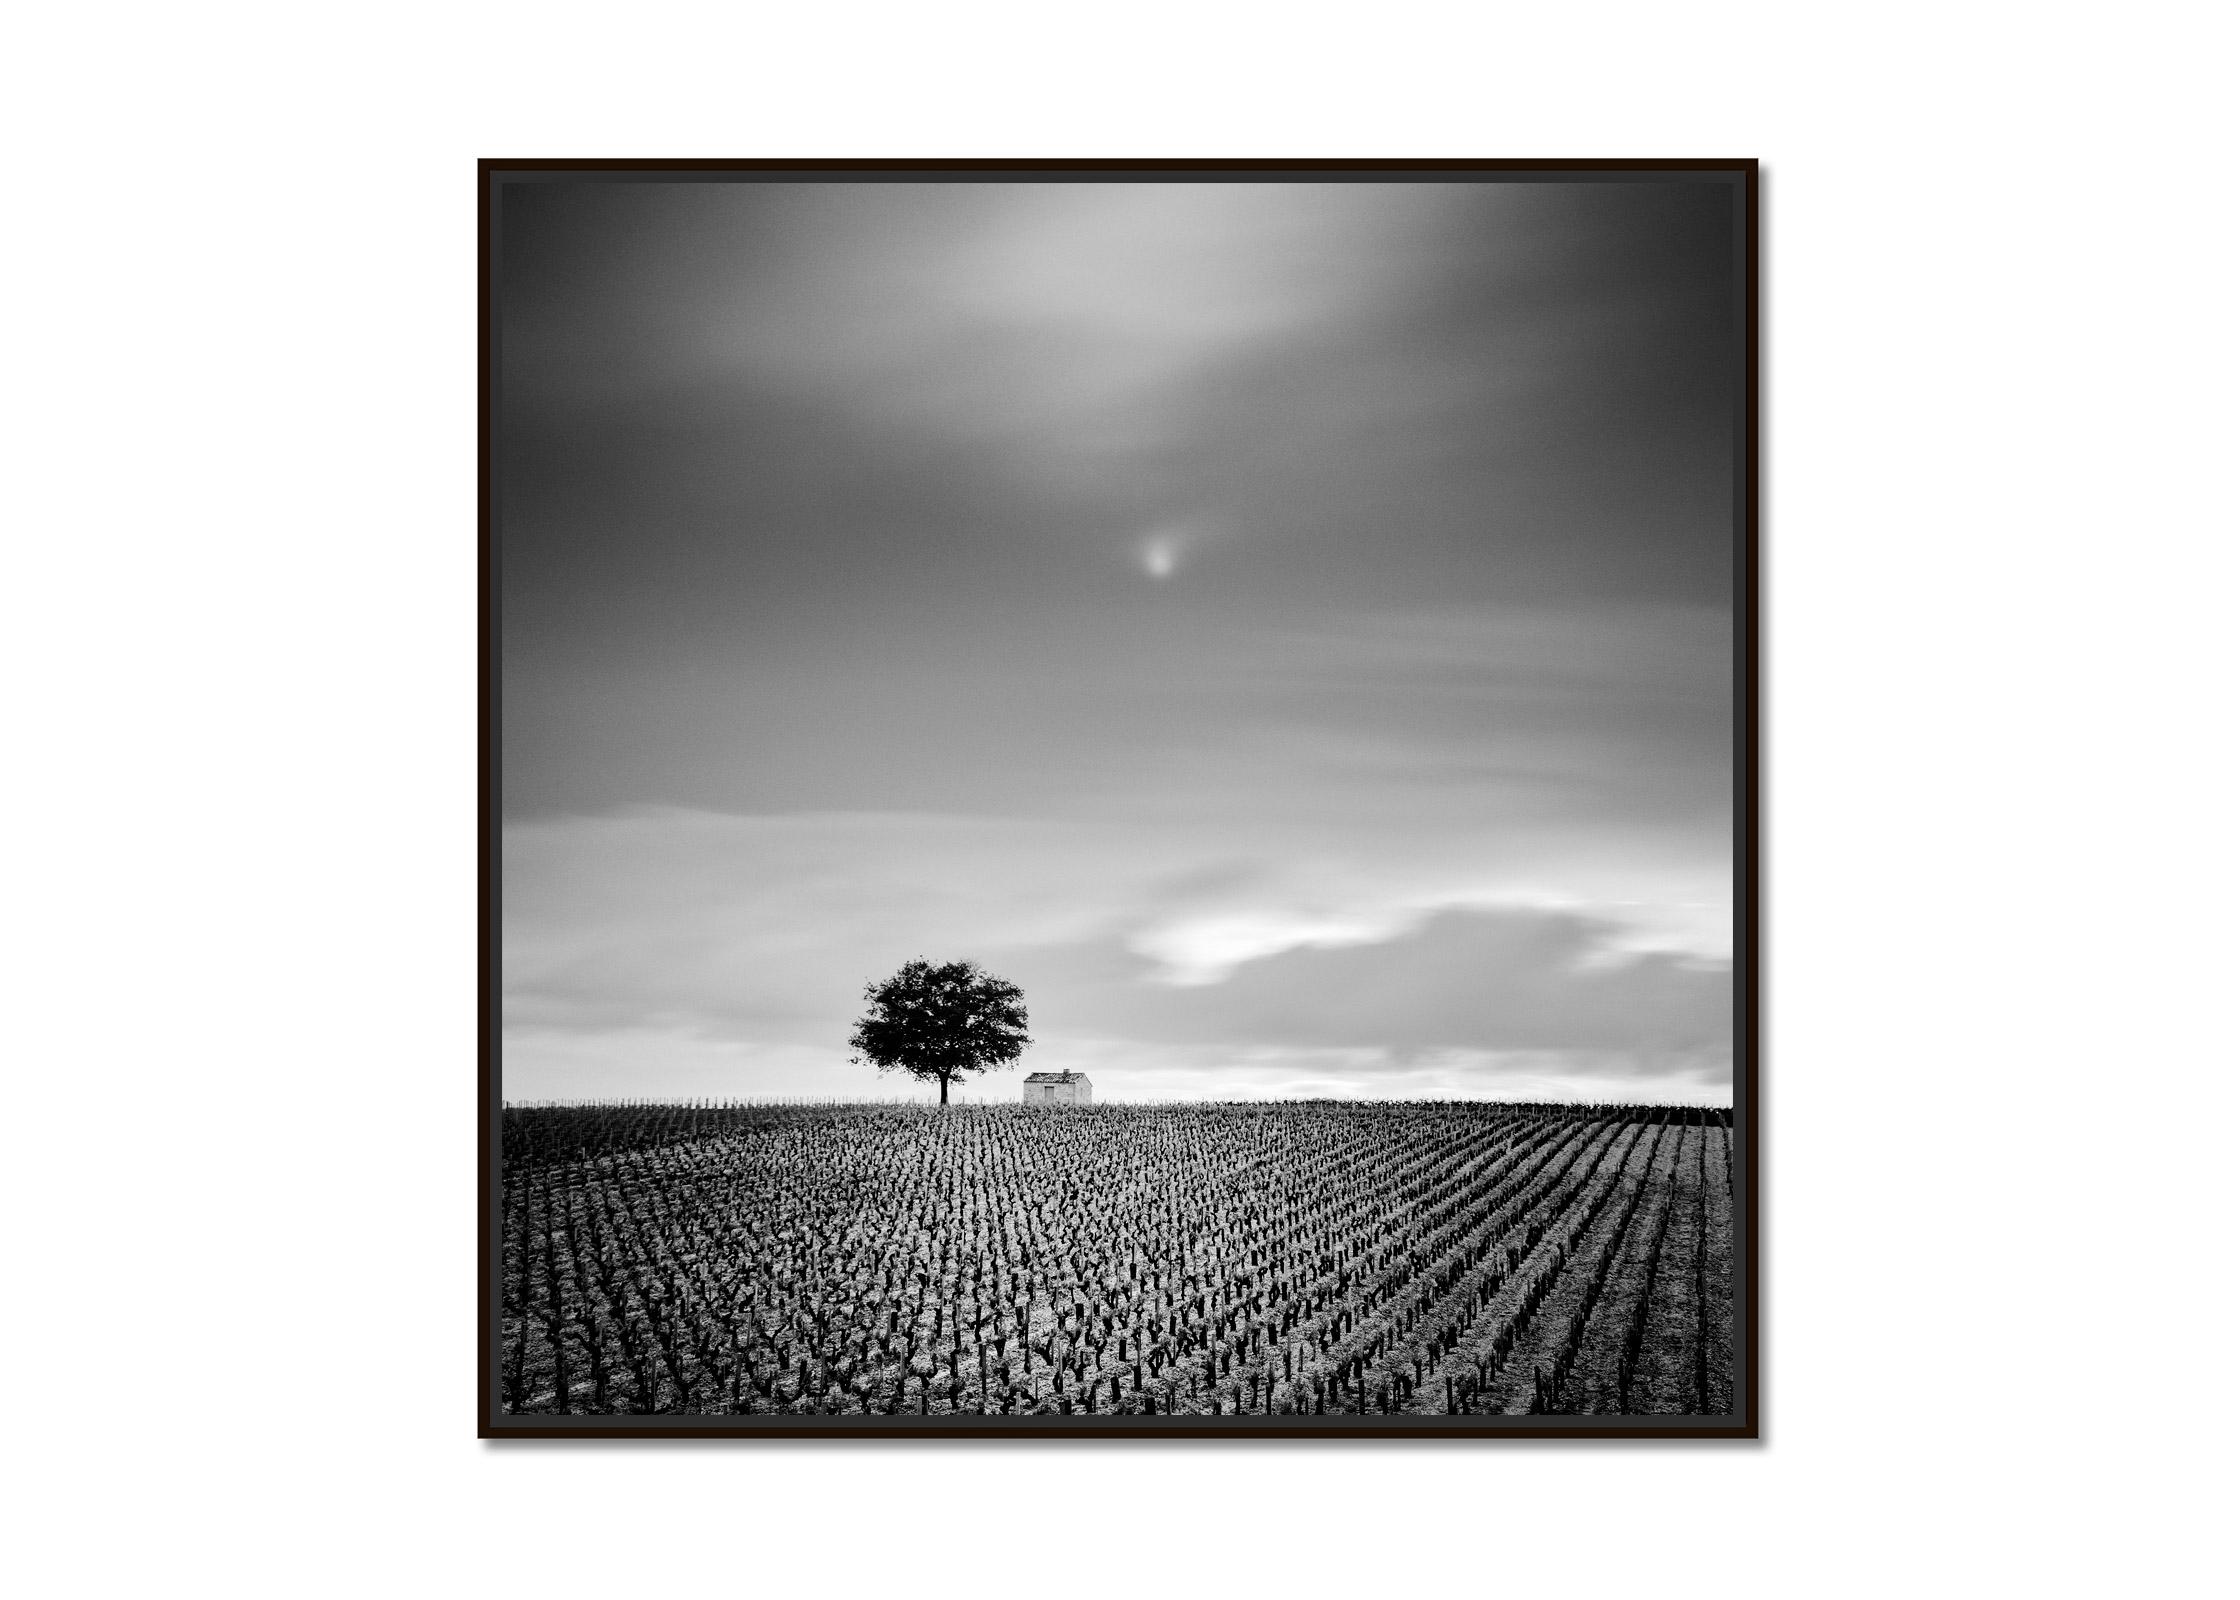 Champagne Paradise, Vineyard, Tree, black and white photography, art landscape - Photograph by Gerald Berghammer